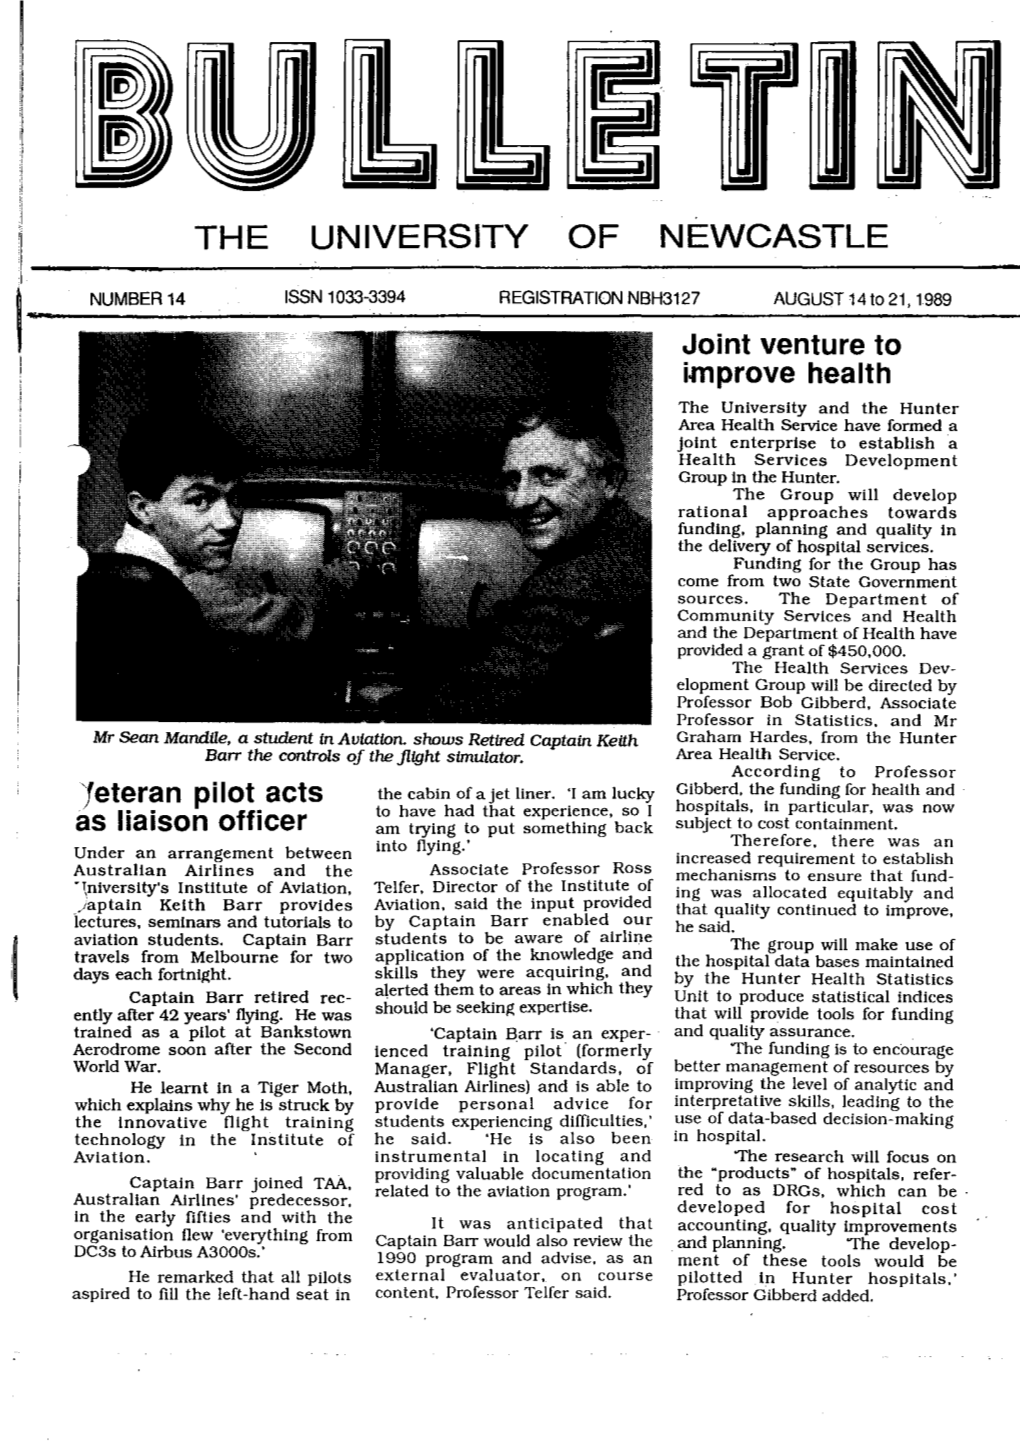 Bulletin, the University of Newcastle, No. 14 [A], August 14 to 21, 1989